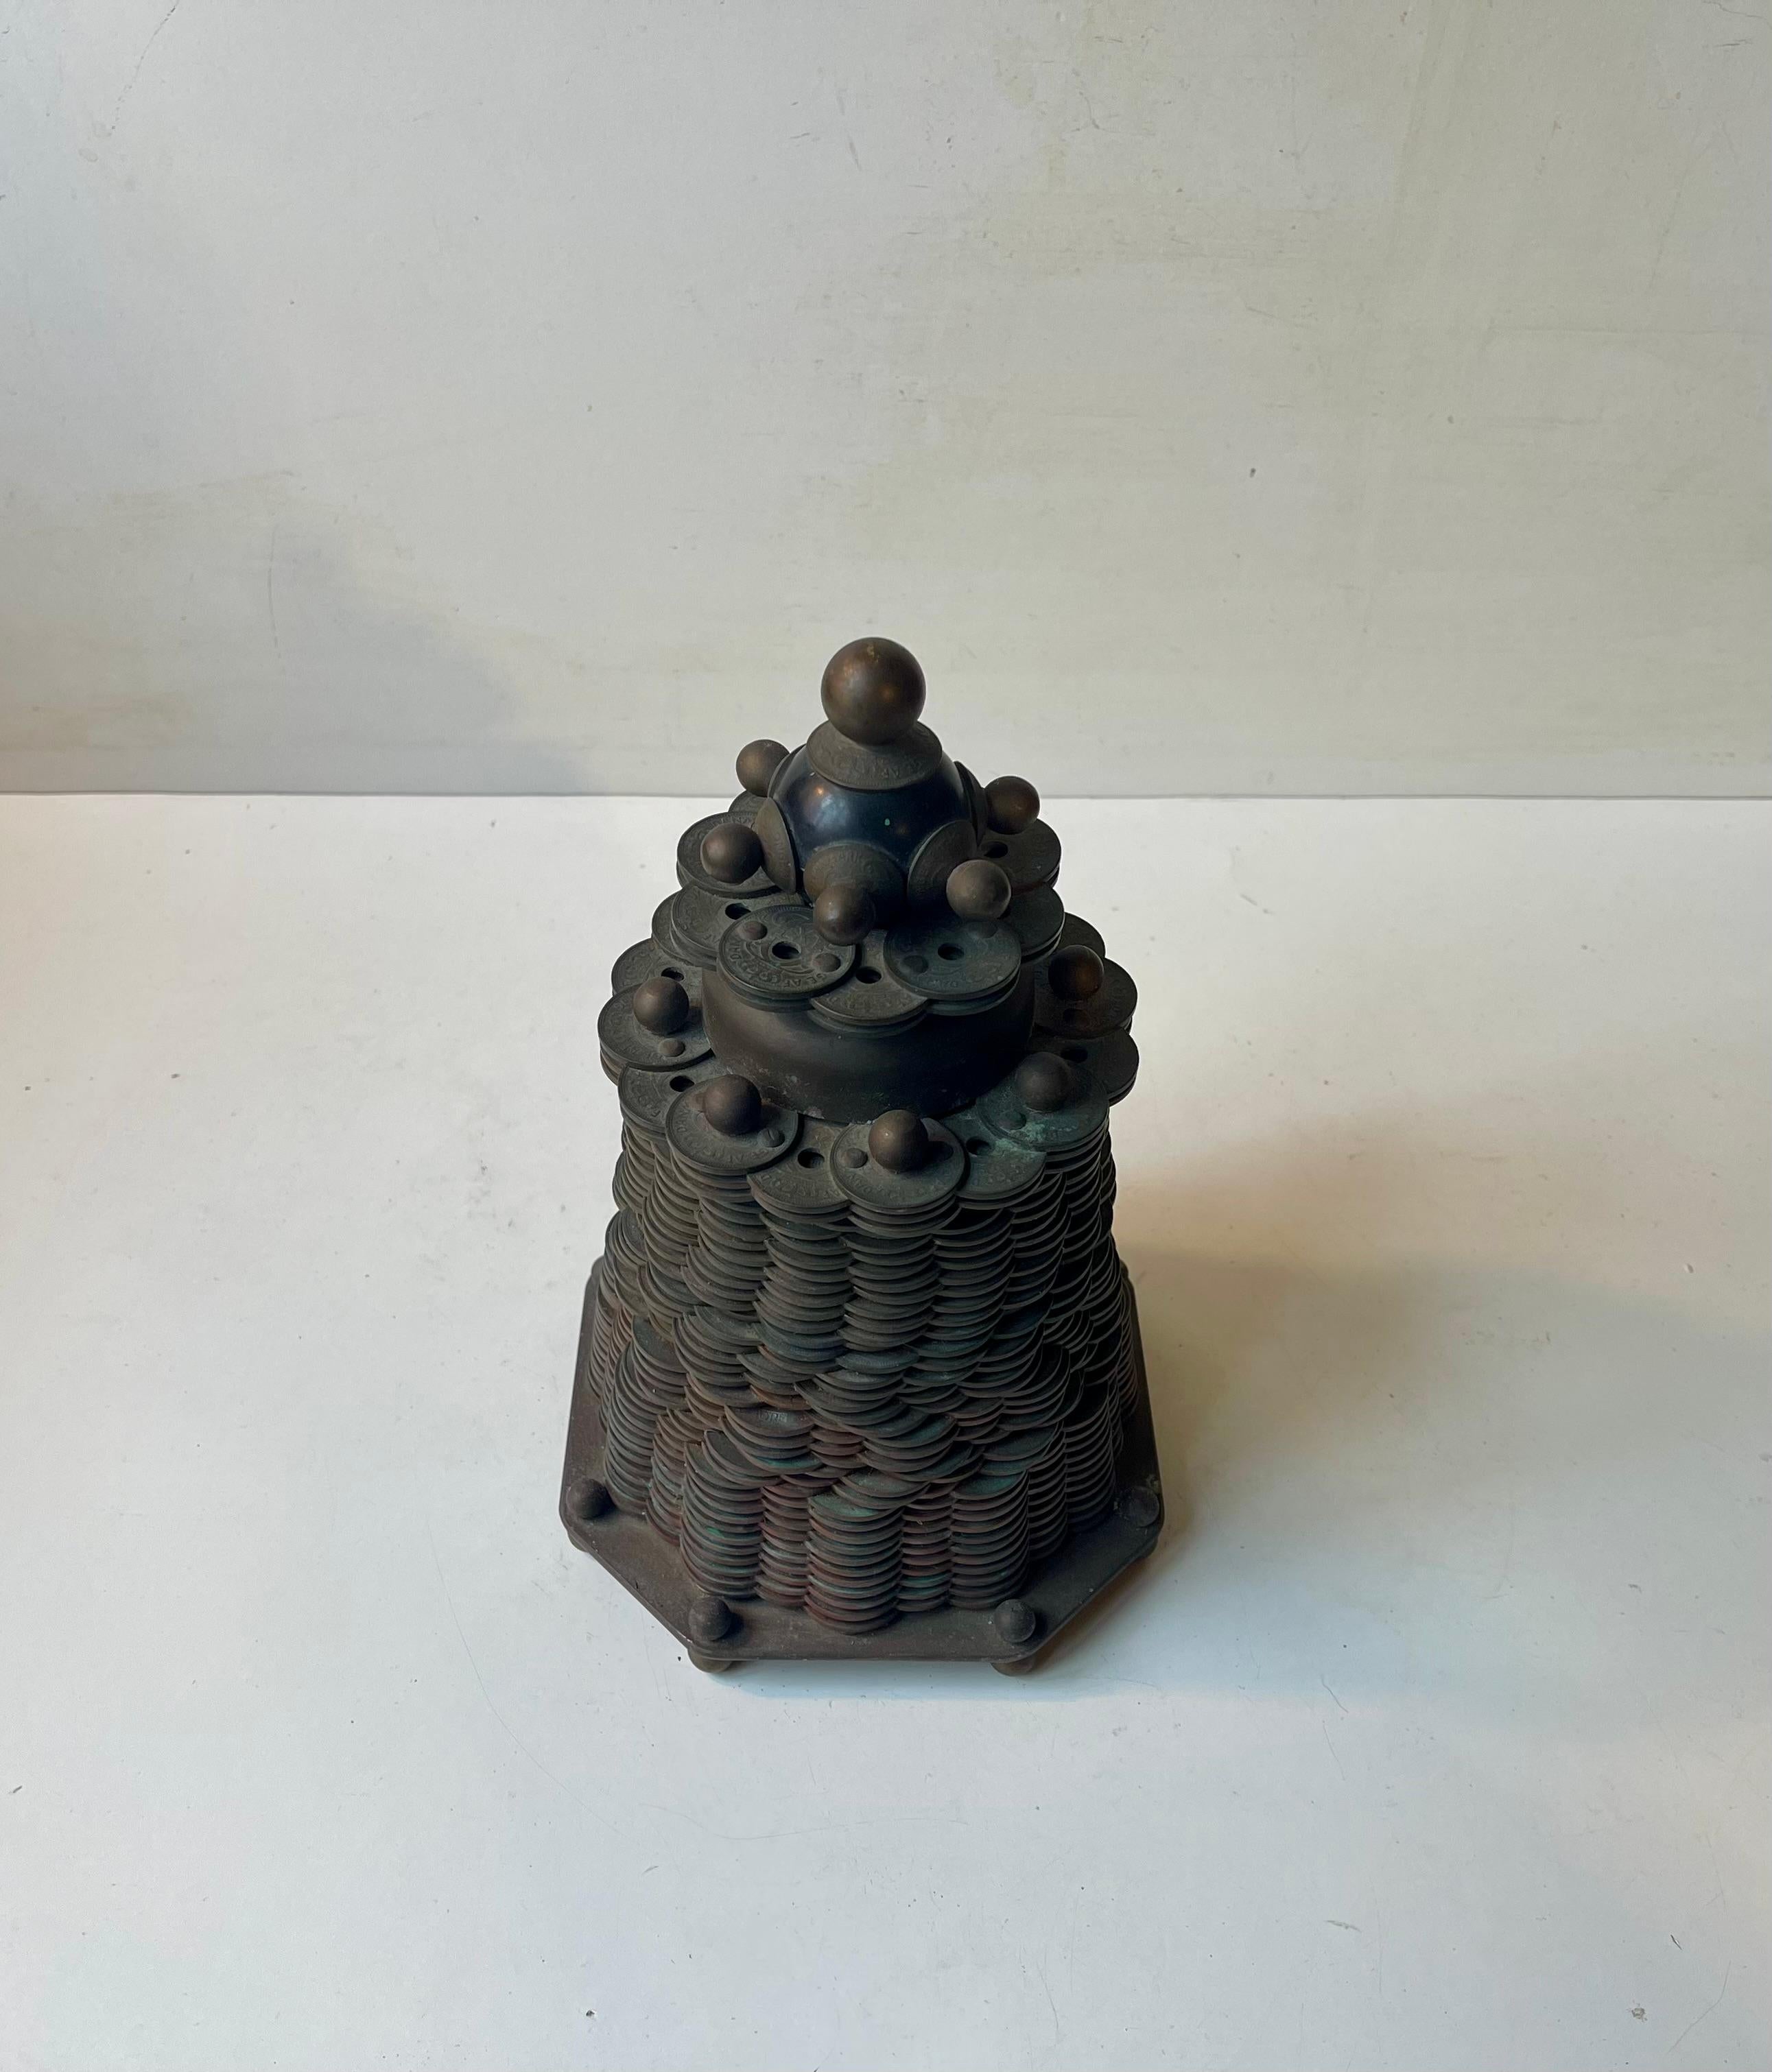 Unusual pagoda shaped coin sculpture called a coin mounain. Legally made in Denmark as an anti-capitalistic manifesto inspired by 'The Pyramid of Capitalist System' ('La Pyramide du systéme capitalist'). In 1973 these smaller valued coins was